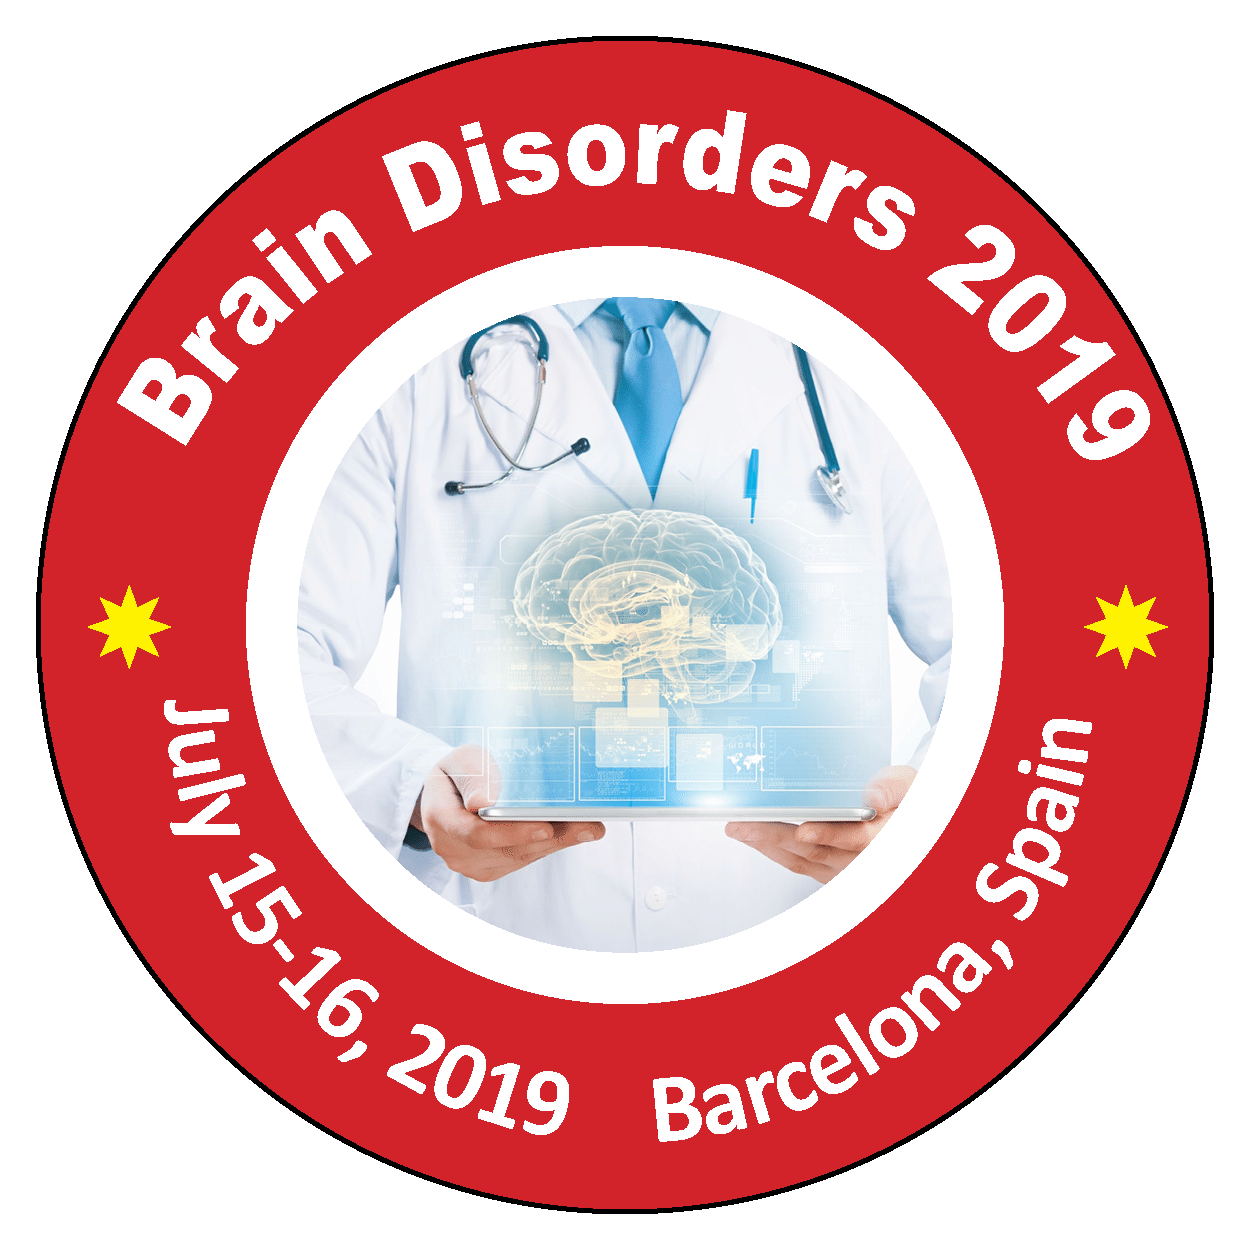 4th Annual Conference on Brain Disorders, Neurology and Therapeutics